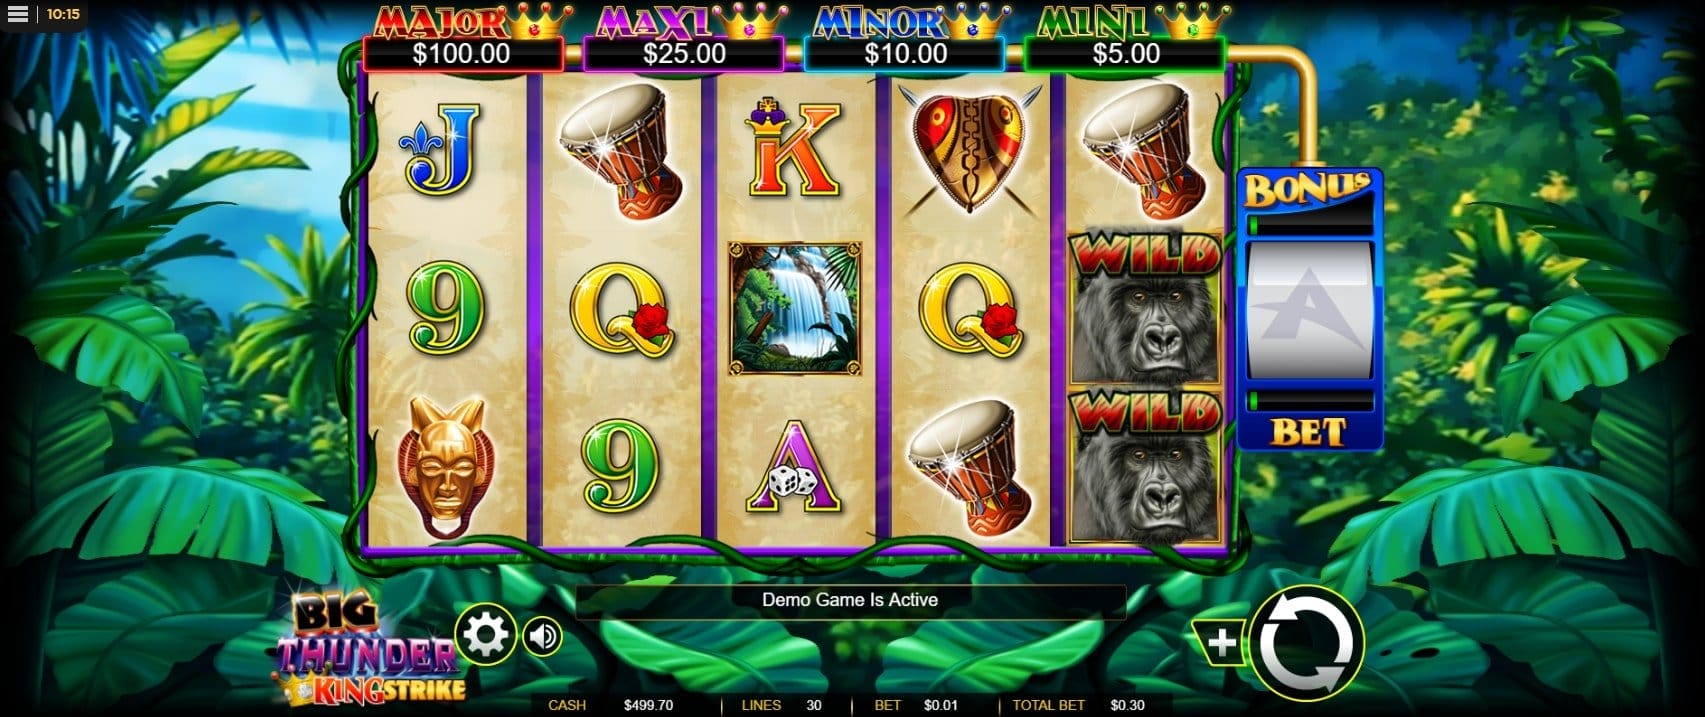 Big Thunder King Strike slot screenshot with  two gorillas and jungle in the background